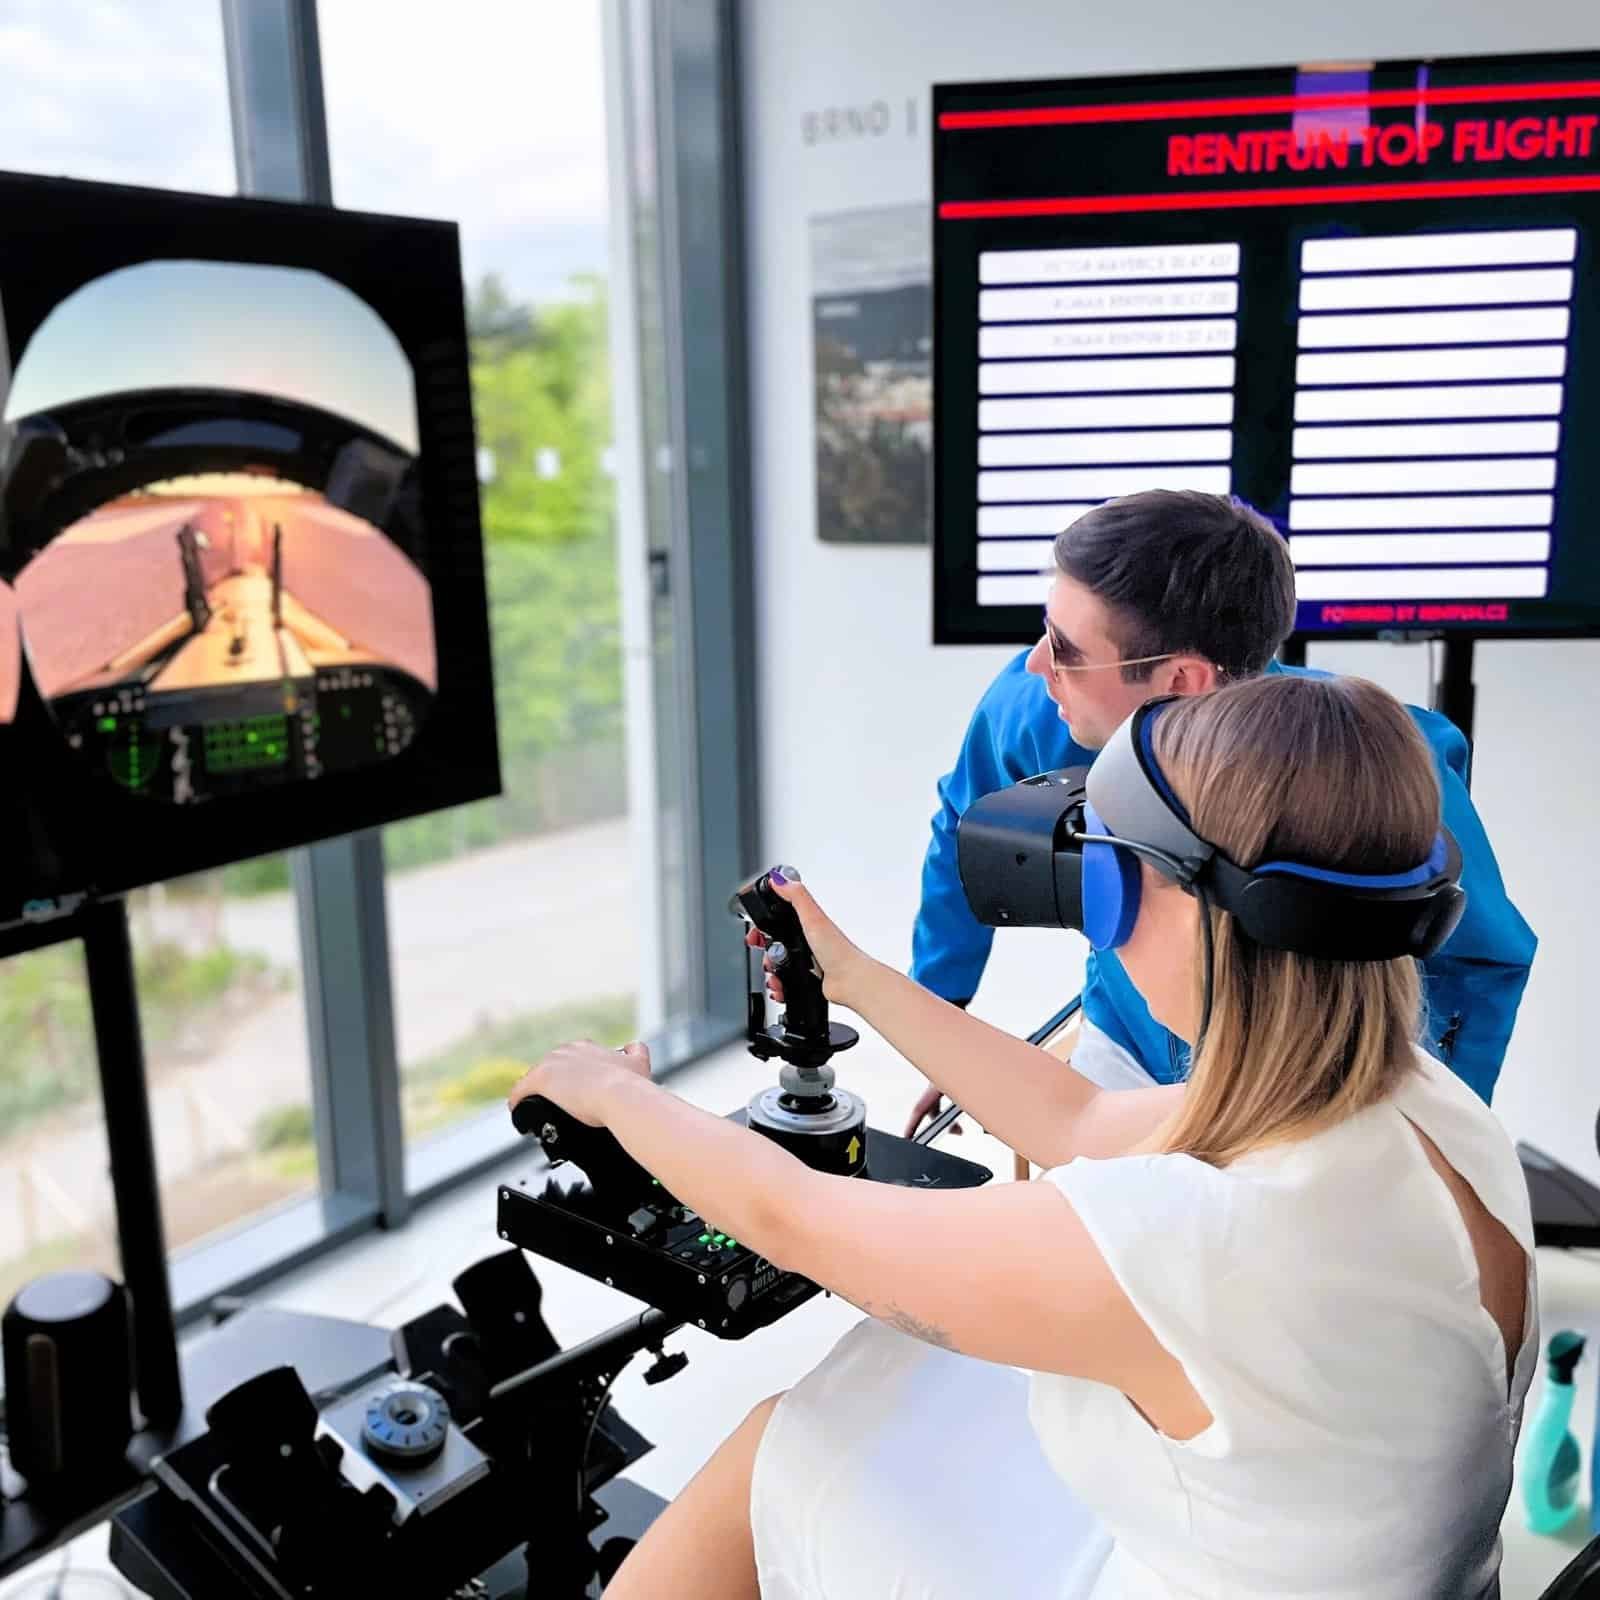 RoarFun Clients ABB immersive jet fighter motion simulator at the star observatory